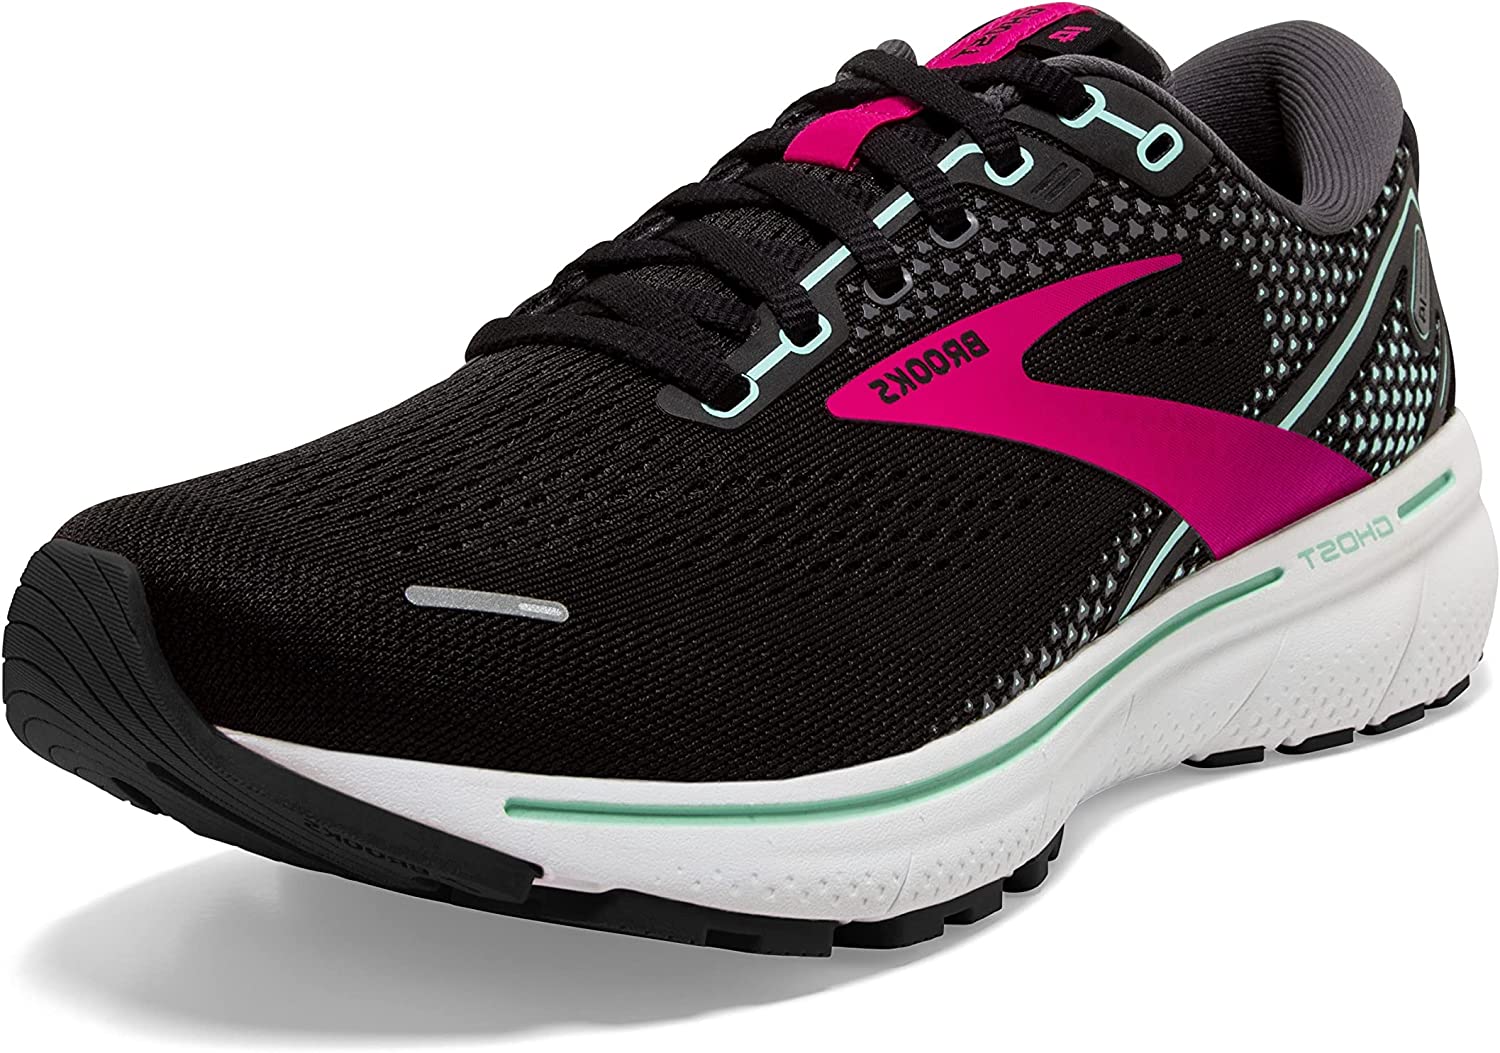 running shoes for bad ankles and knees review